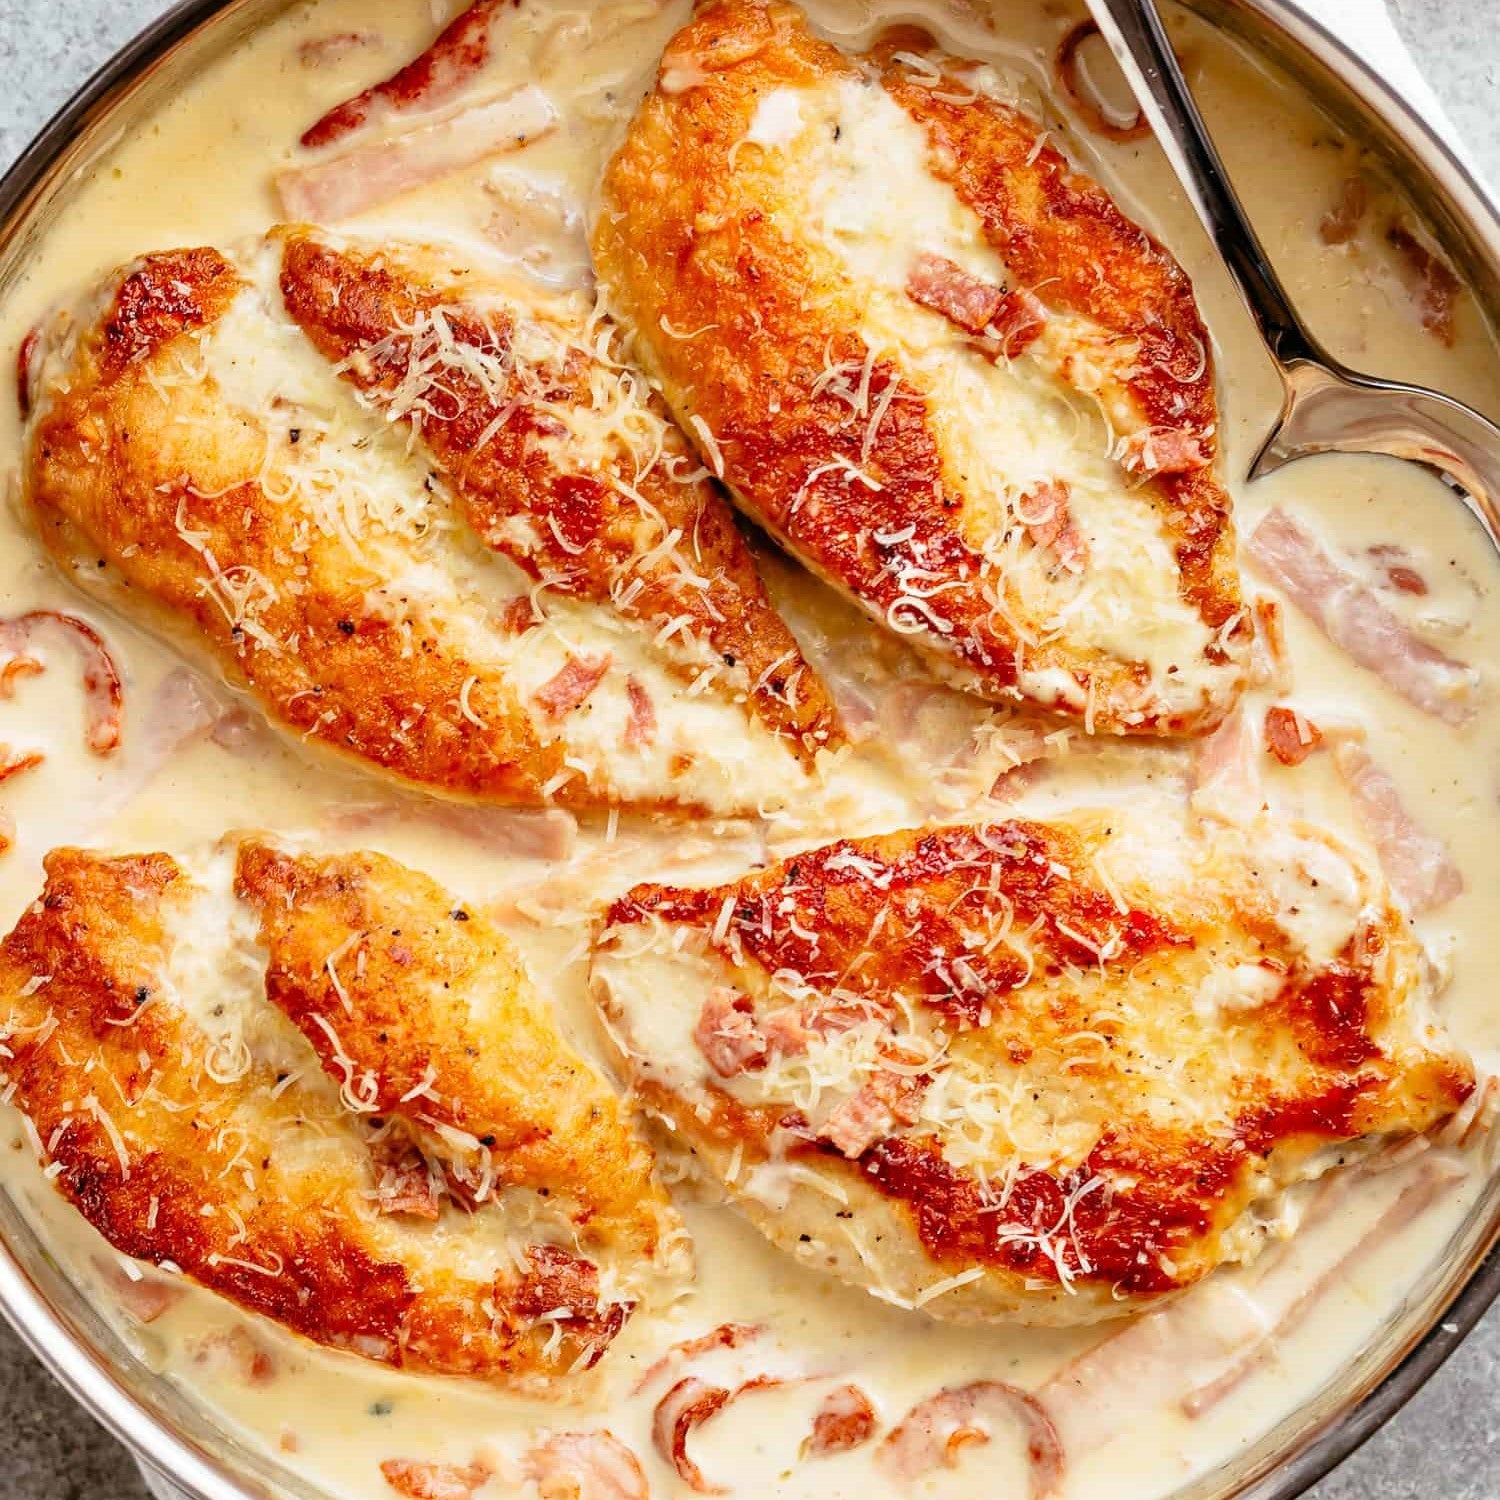 Roasted Chicken with Mushroom and Carbonara Sauce (2 lbs)